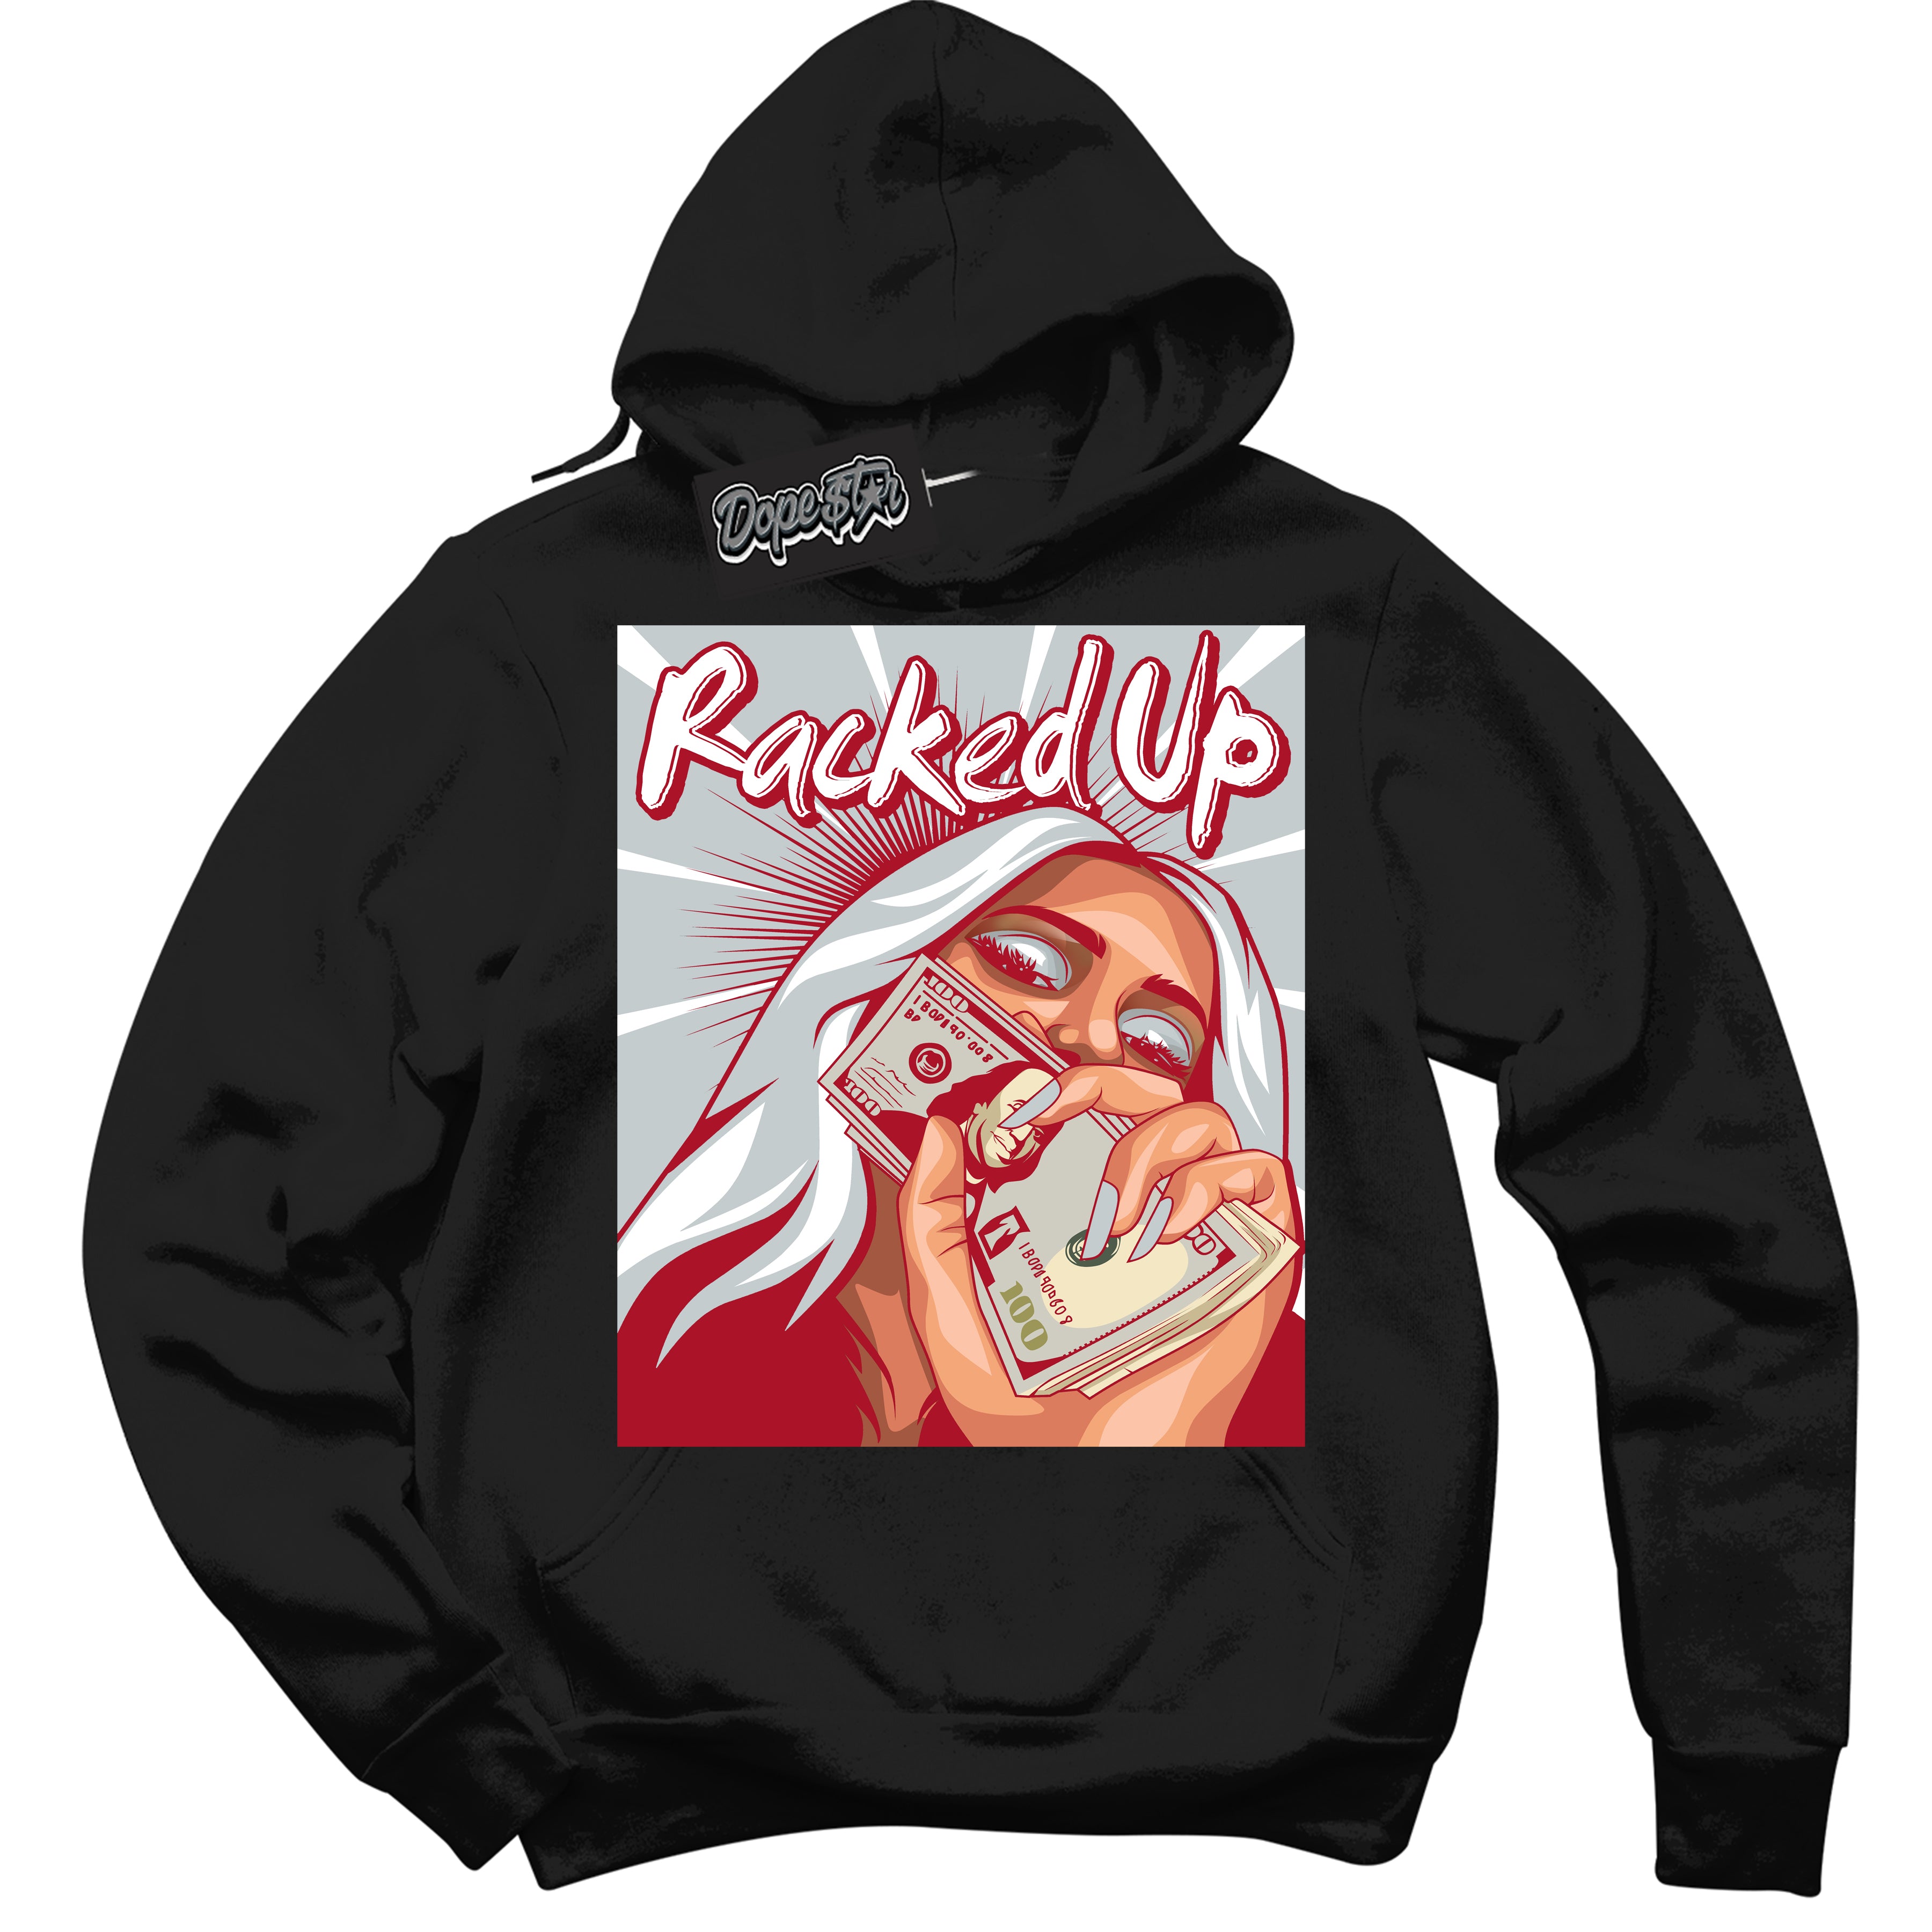 Cool Black Hoodie with “ Racked Up ”  design that Perfectly Matches  Reverse Ultraman Sneakers.